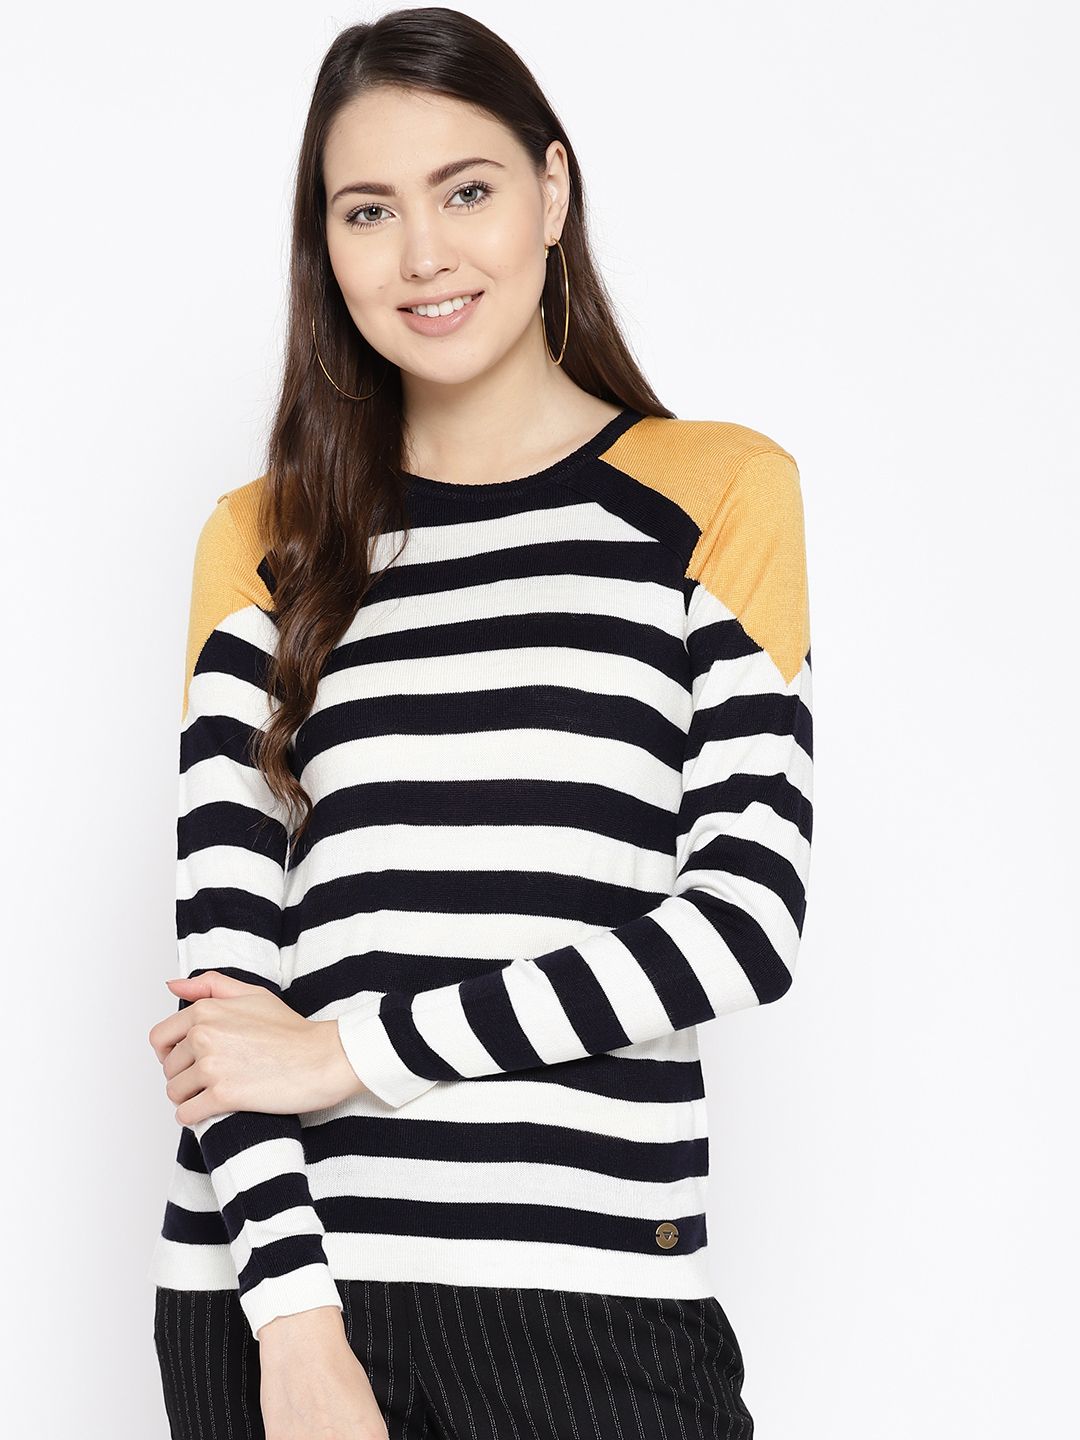 Cayman Women Off-White & Black Striped Sweater Price in India